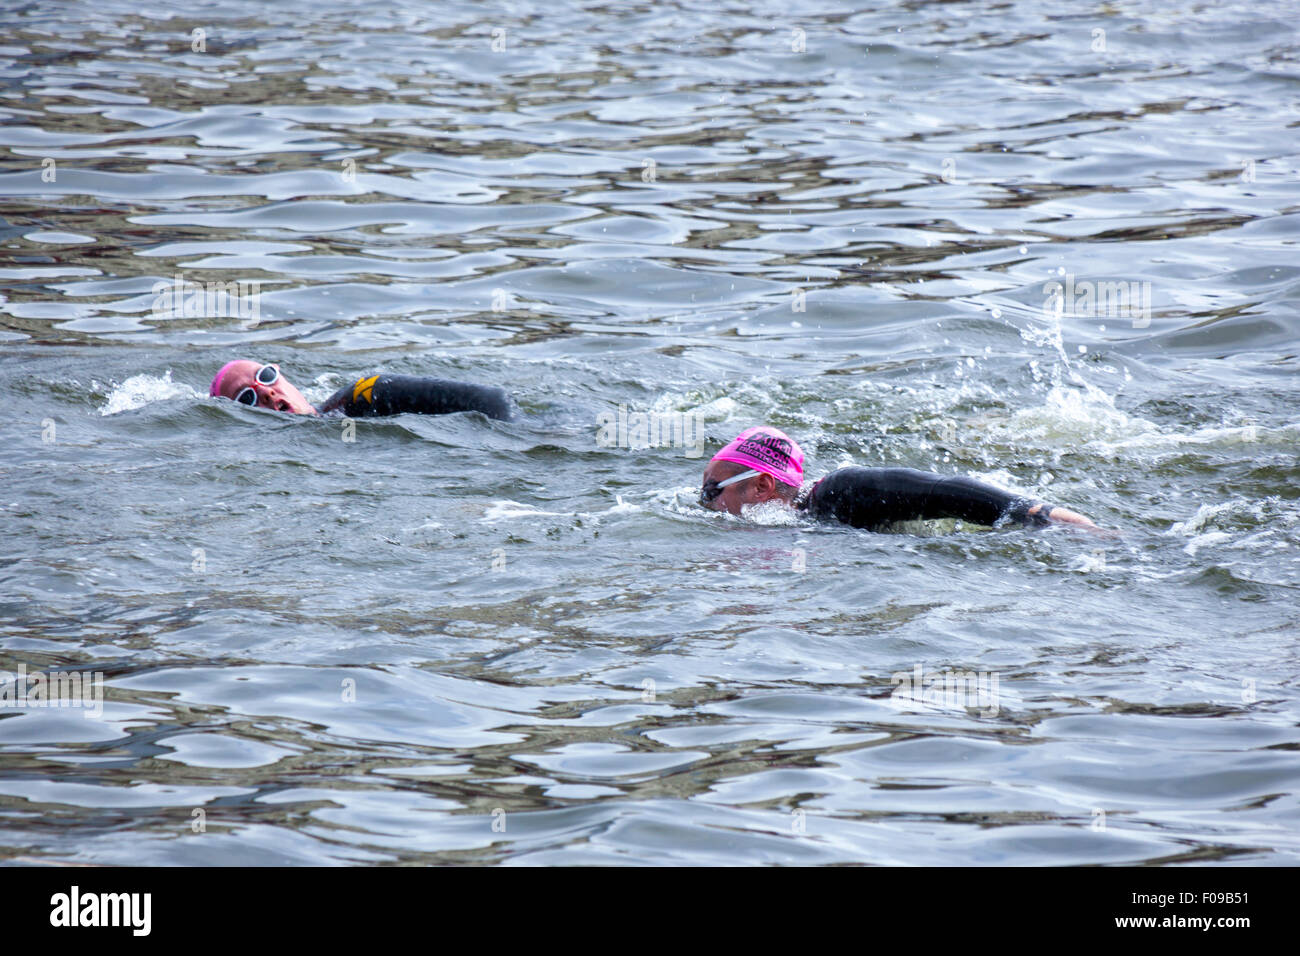 London, UK. 9 August 2015 -  The participants of the annual London Triathlon swim, cycle and run around Docklands in the eastern part of the capital. The world’s largest triathlon with its 13,000 participants, caters for all levels and abilities, and features Super-Sprint, Sprint, Olympic and Olympic Plus distances. Credit: Nathaniel Noir/Alamy Live News Stock Photo